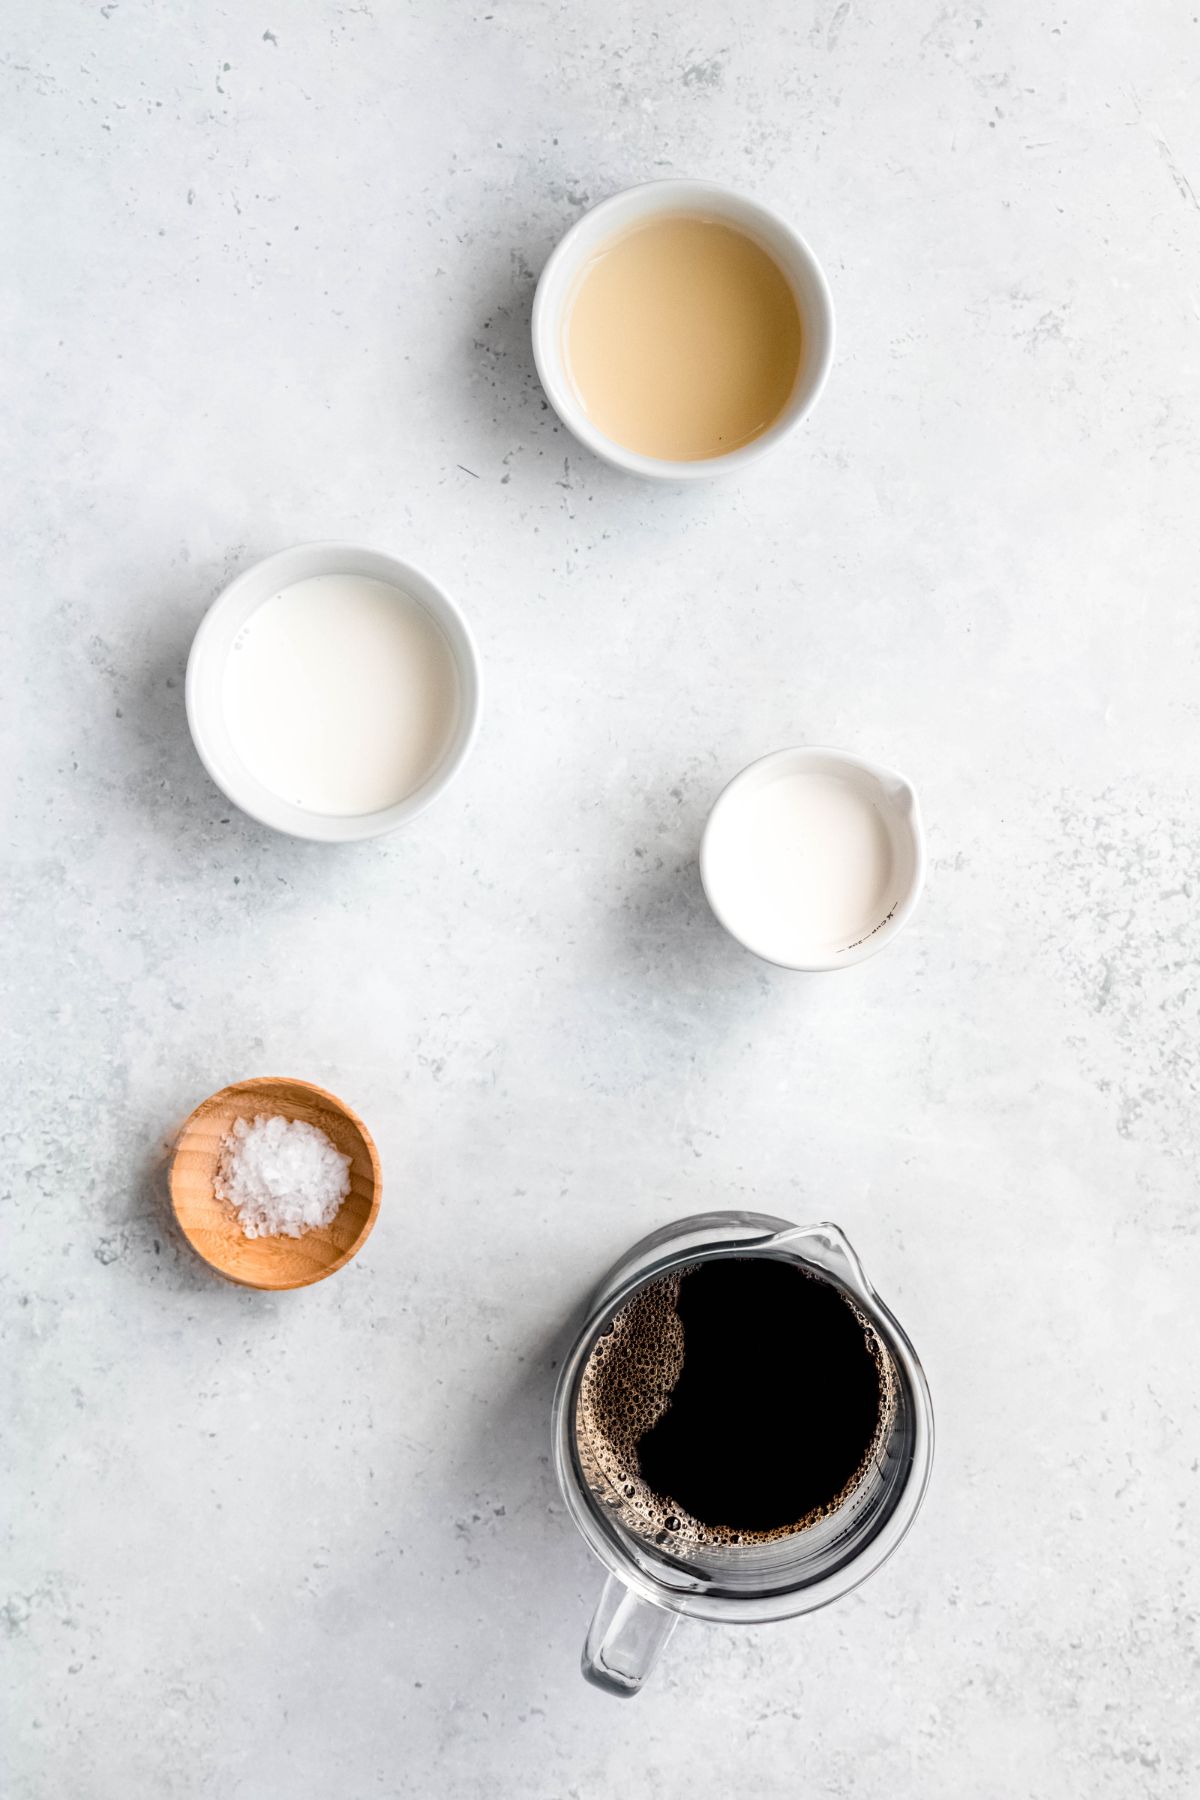 ingredients needed to make salted caramel cream cold brew measured out into bowls on a white table.